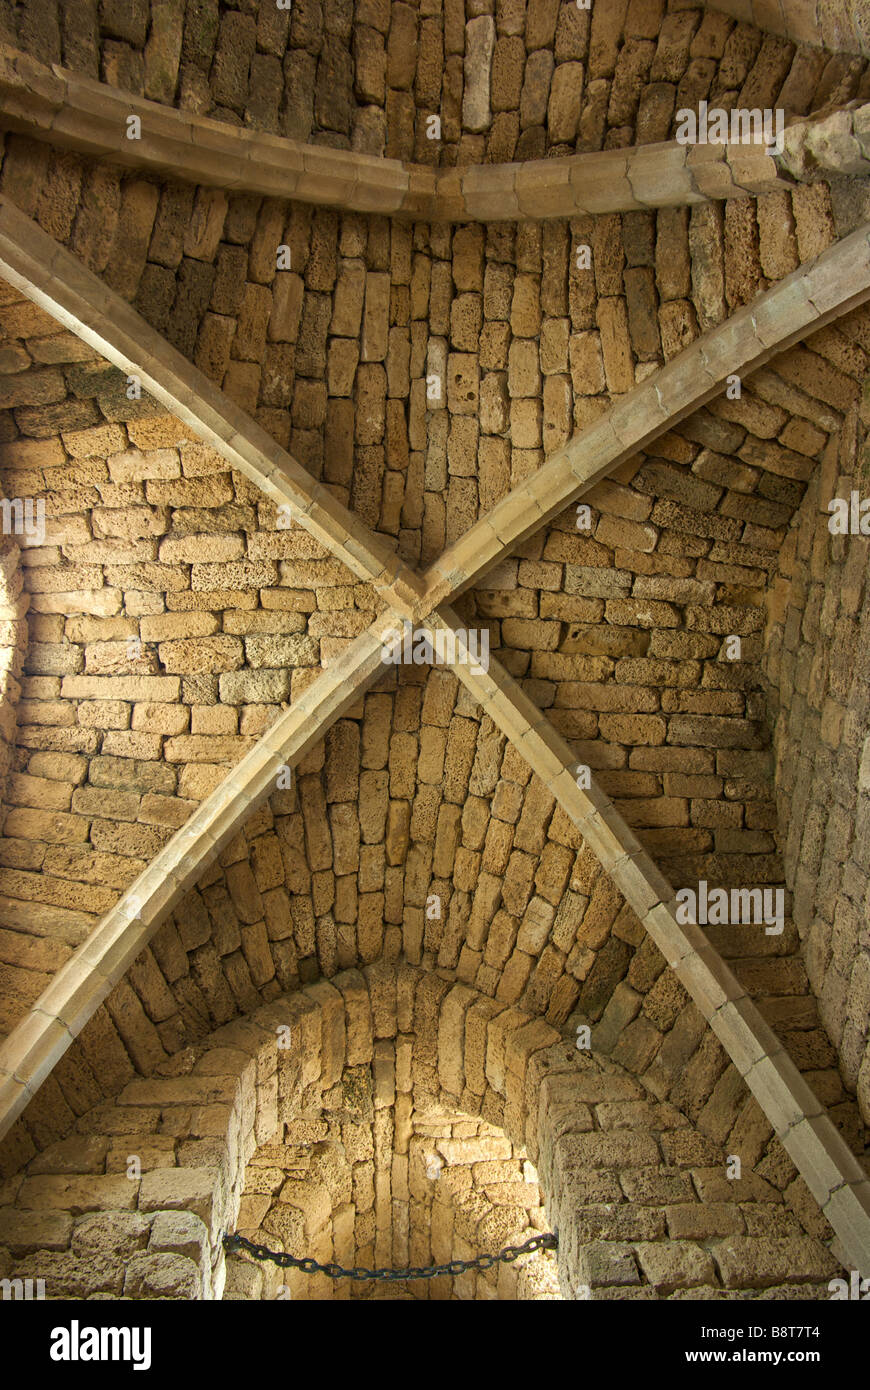 Steeply arched vaulted ceiling of Crusader fort dating to 1250 AD built over ruins of King Herod built port Caesarea Stock Photo